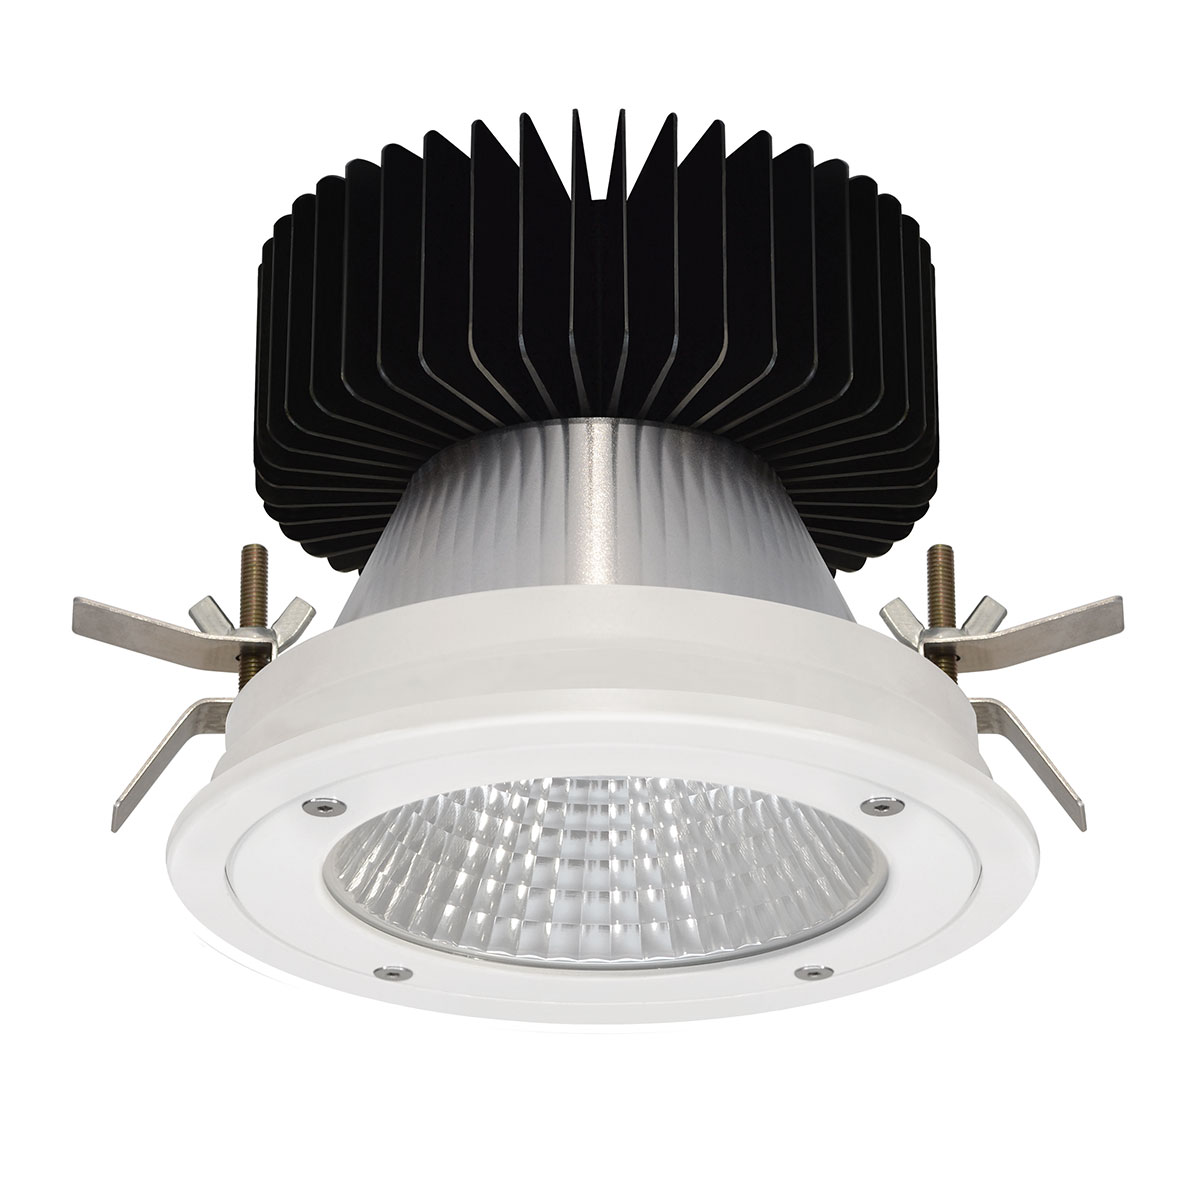 Kopa 12W Anti Tamper Fixed Round Recessed Downlight IP65 Rated 60° Degree Reflector White